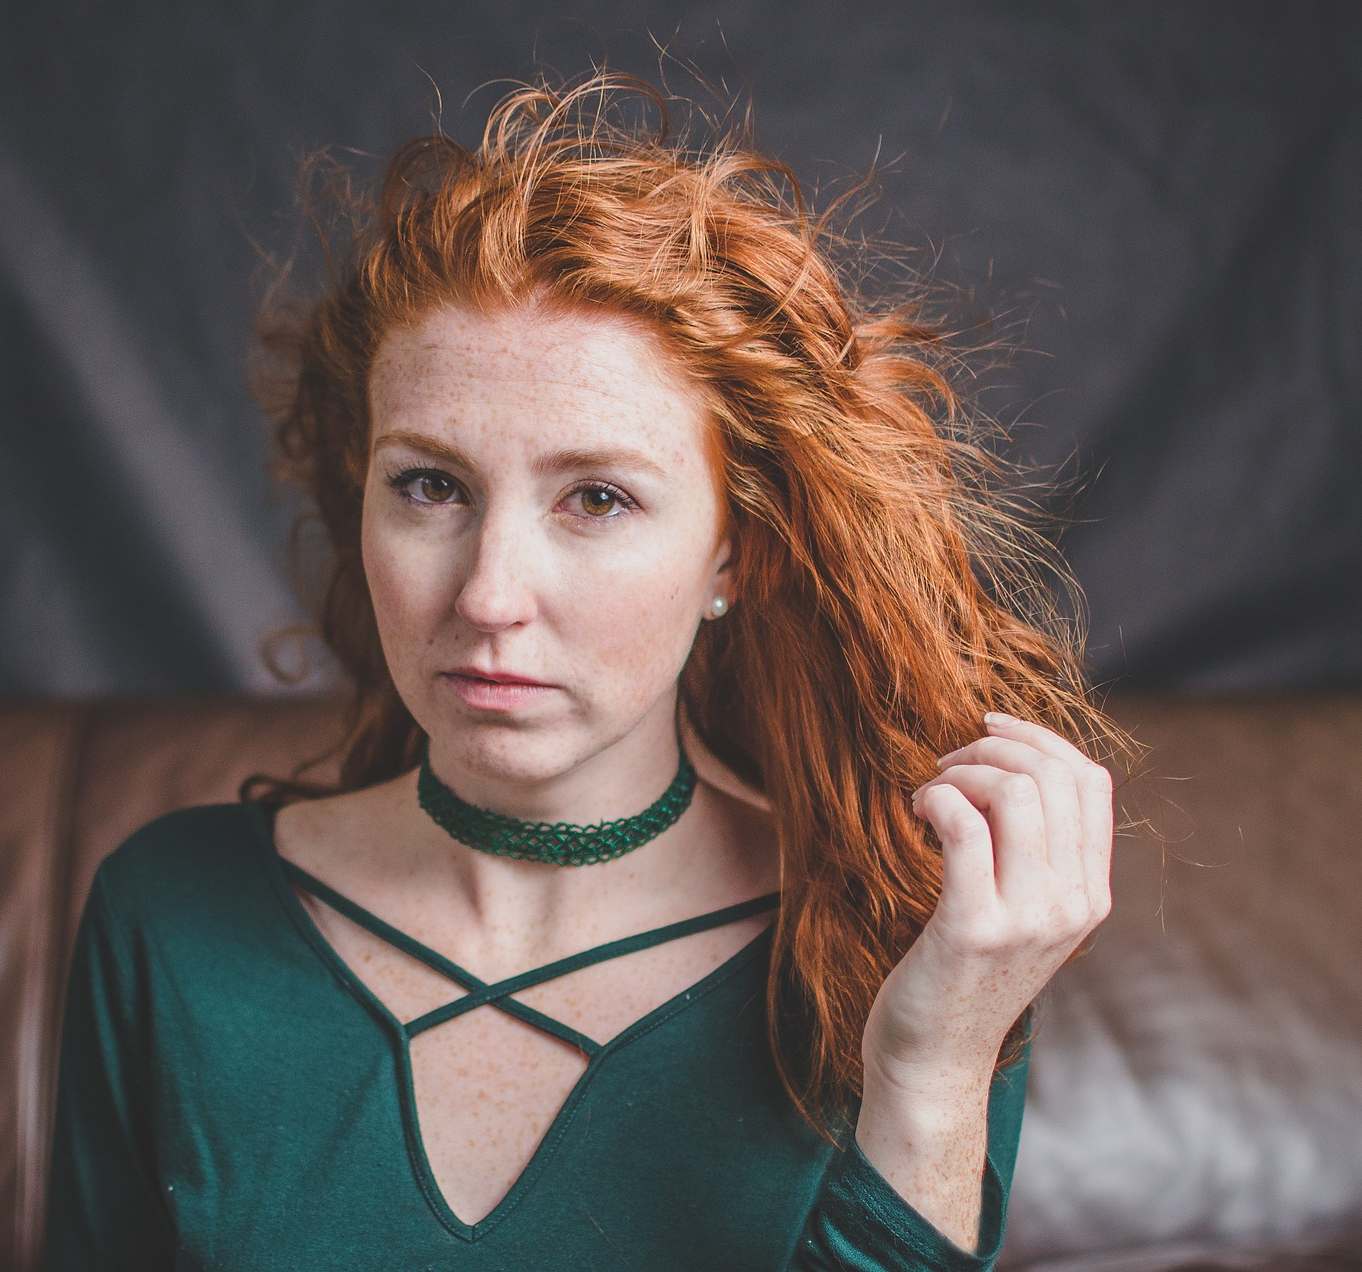 Photograph of a redheaded woman representing Moira from Meadowsweet.